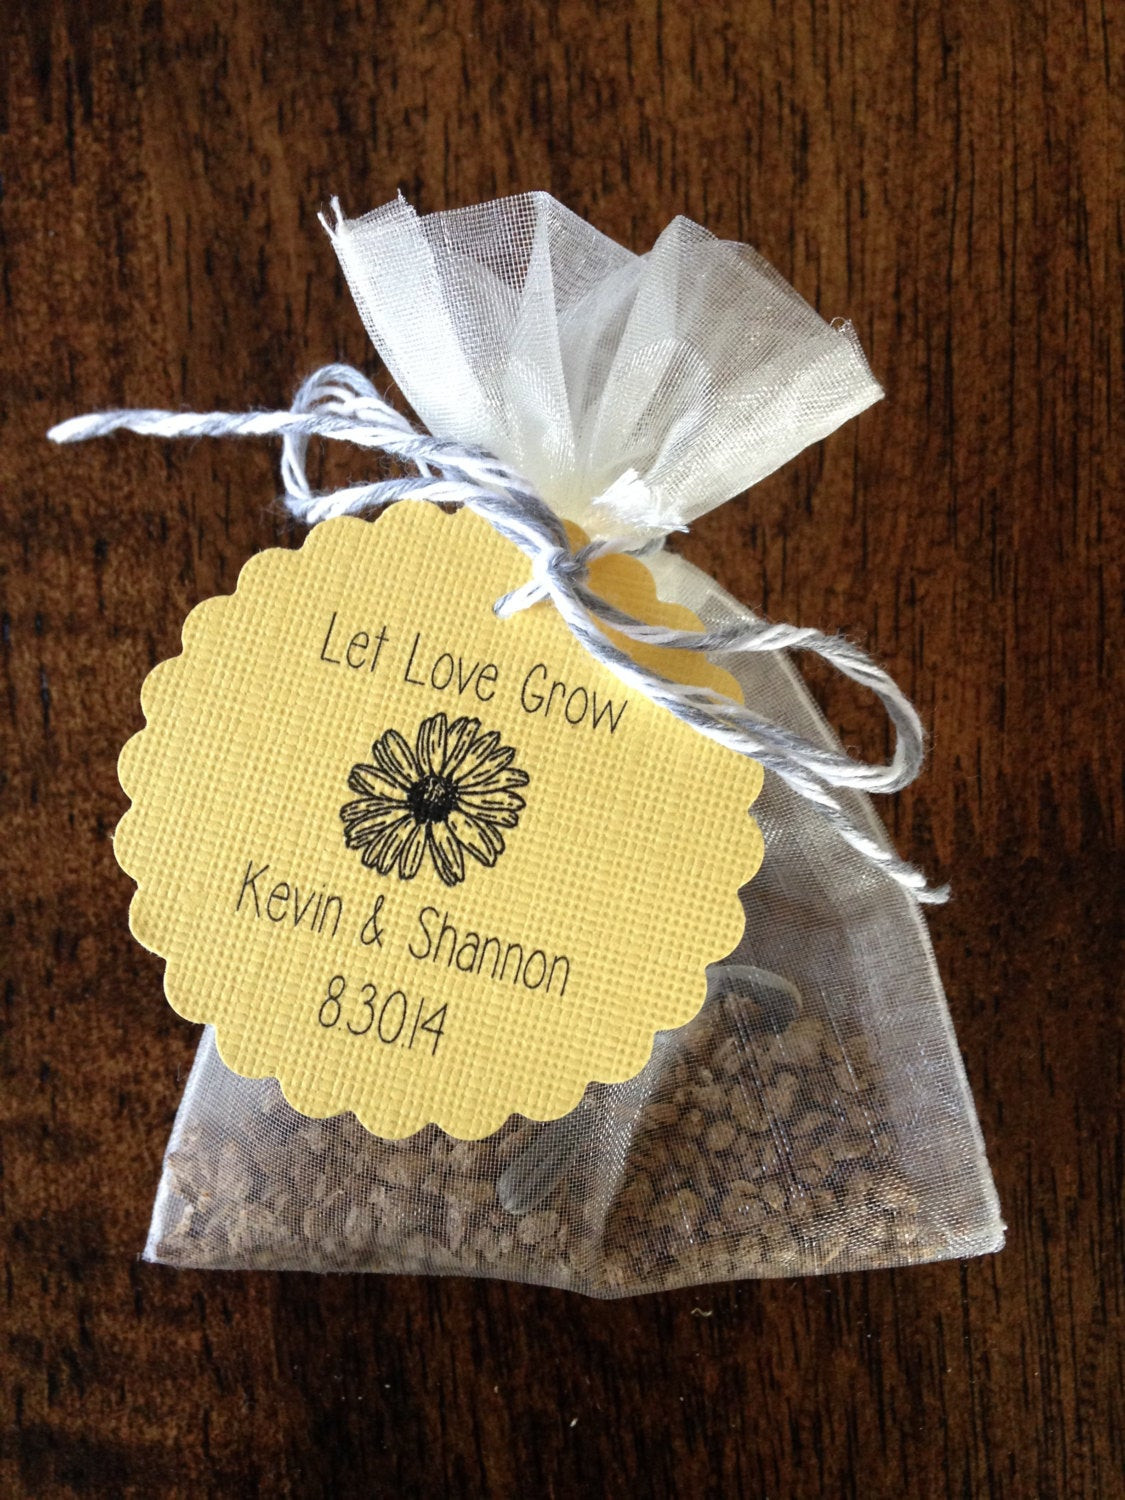 Flower Wedding Favors
 Flower Seed Wedding Favors Events Weddings by